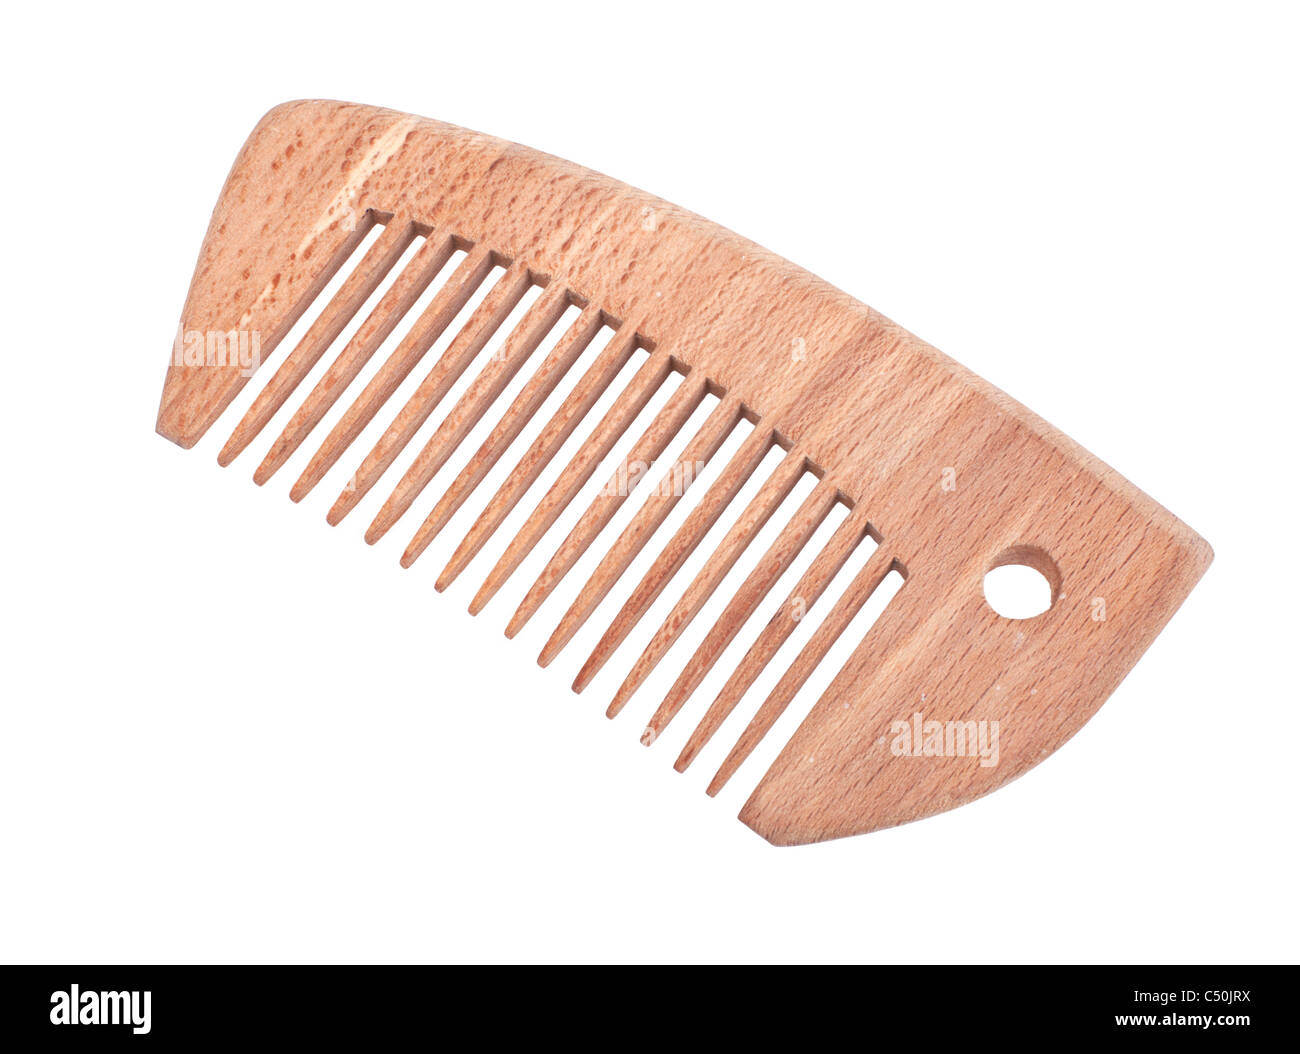 wooden comb isolated on white background Stock Photo